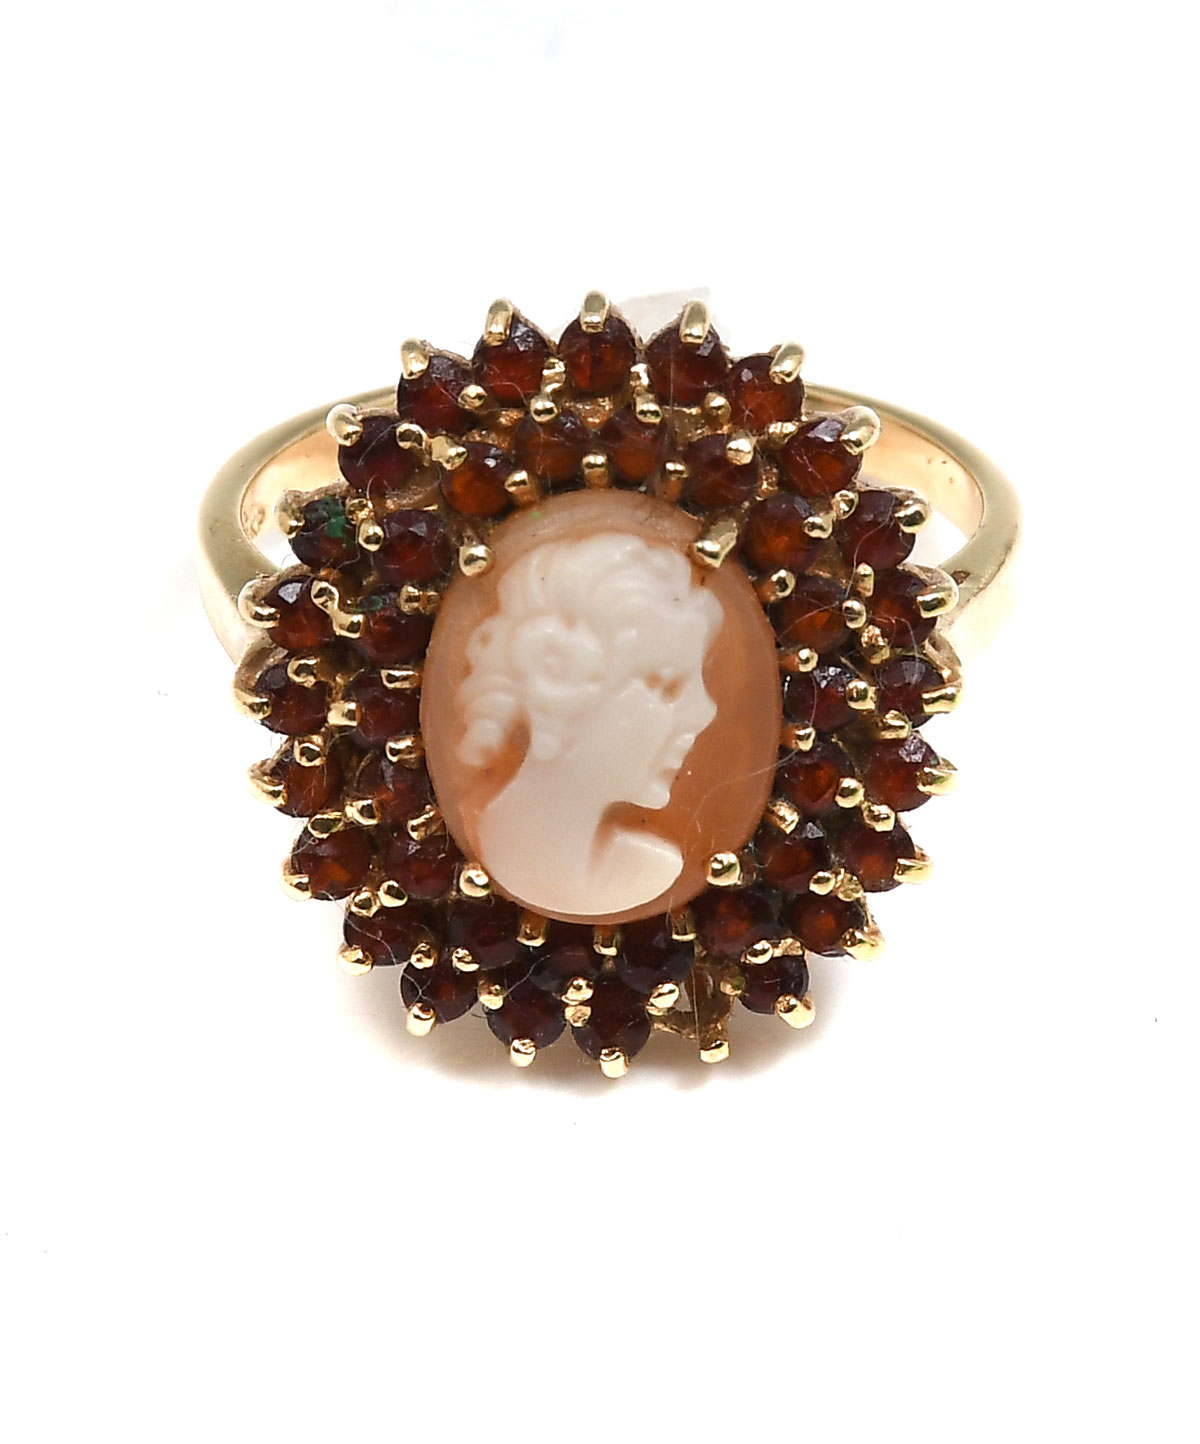 14K CAMEO RING WITH GARNETS: 14K yellow